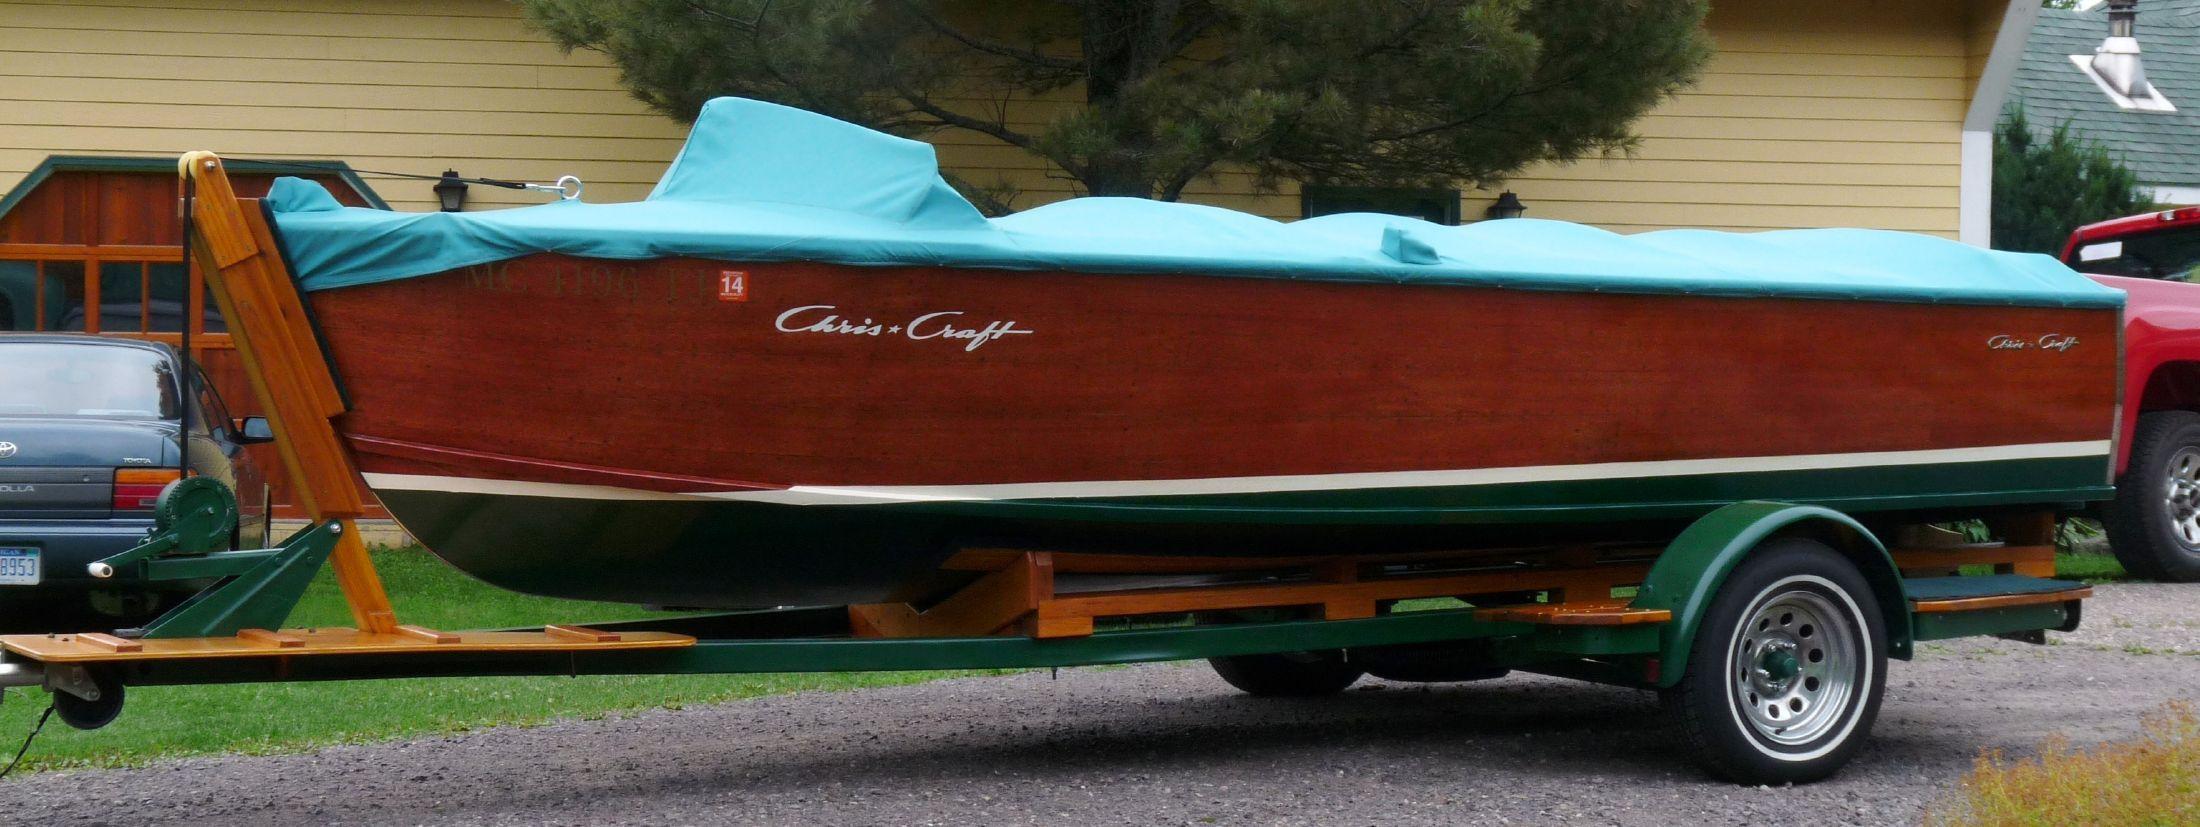 Chris Craft Sportsman and truck, Houghton